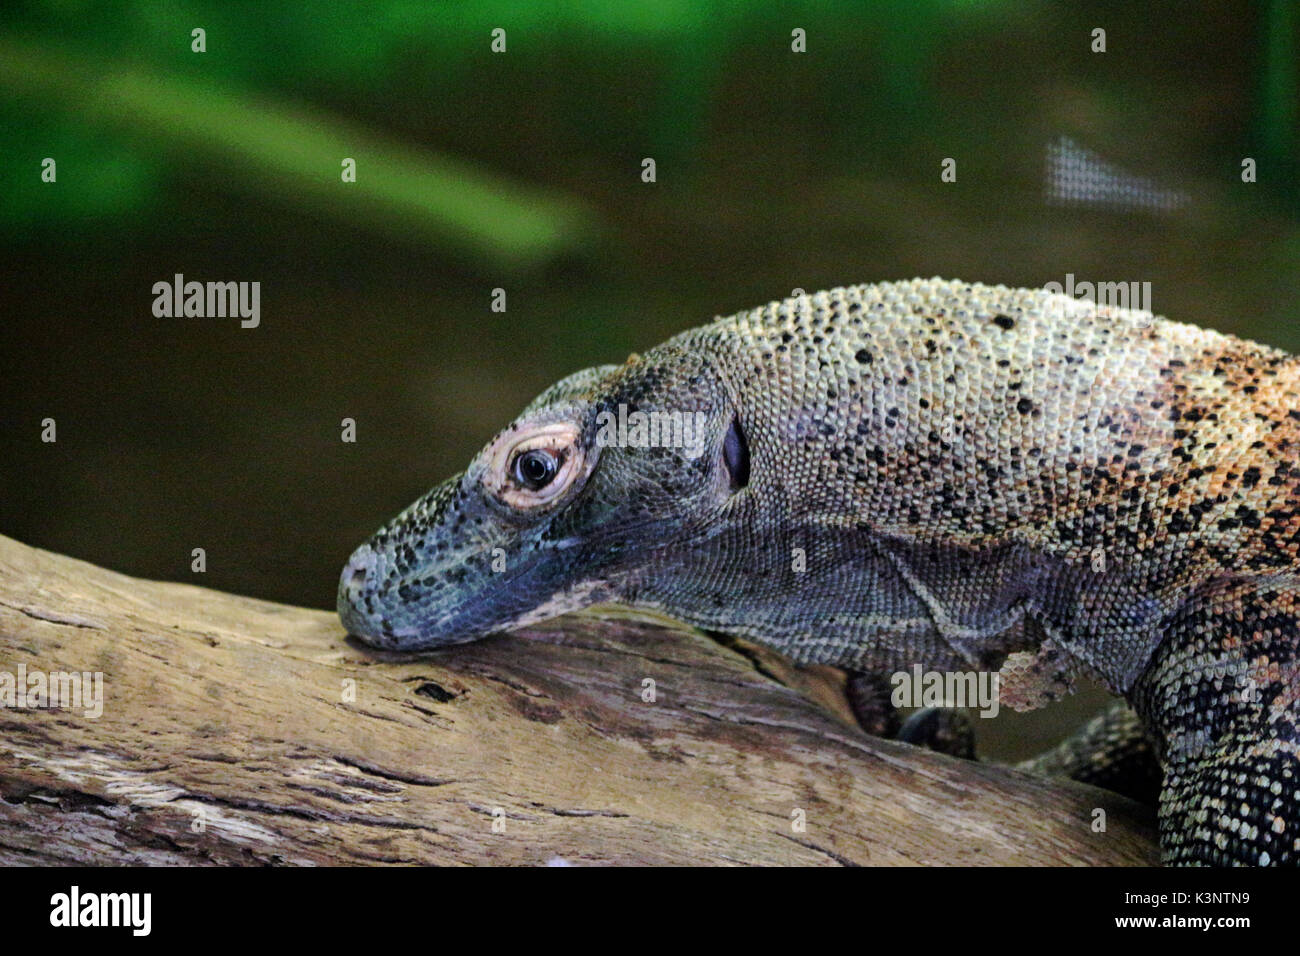 A Head Shot of a Komodo dragon Resting on a log with a natural background. Stock Photo